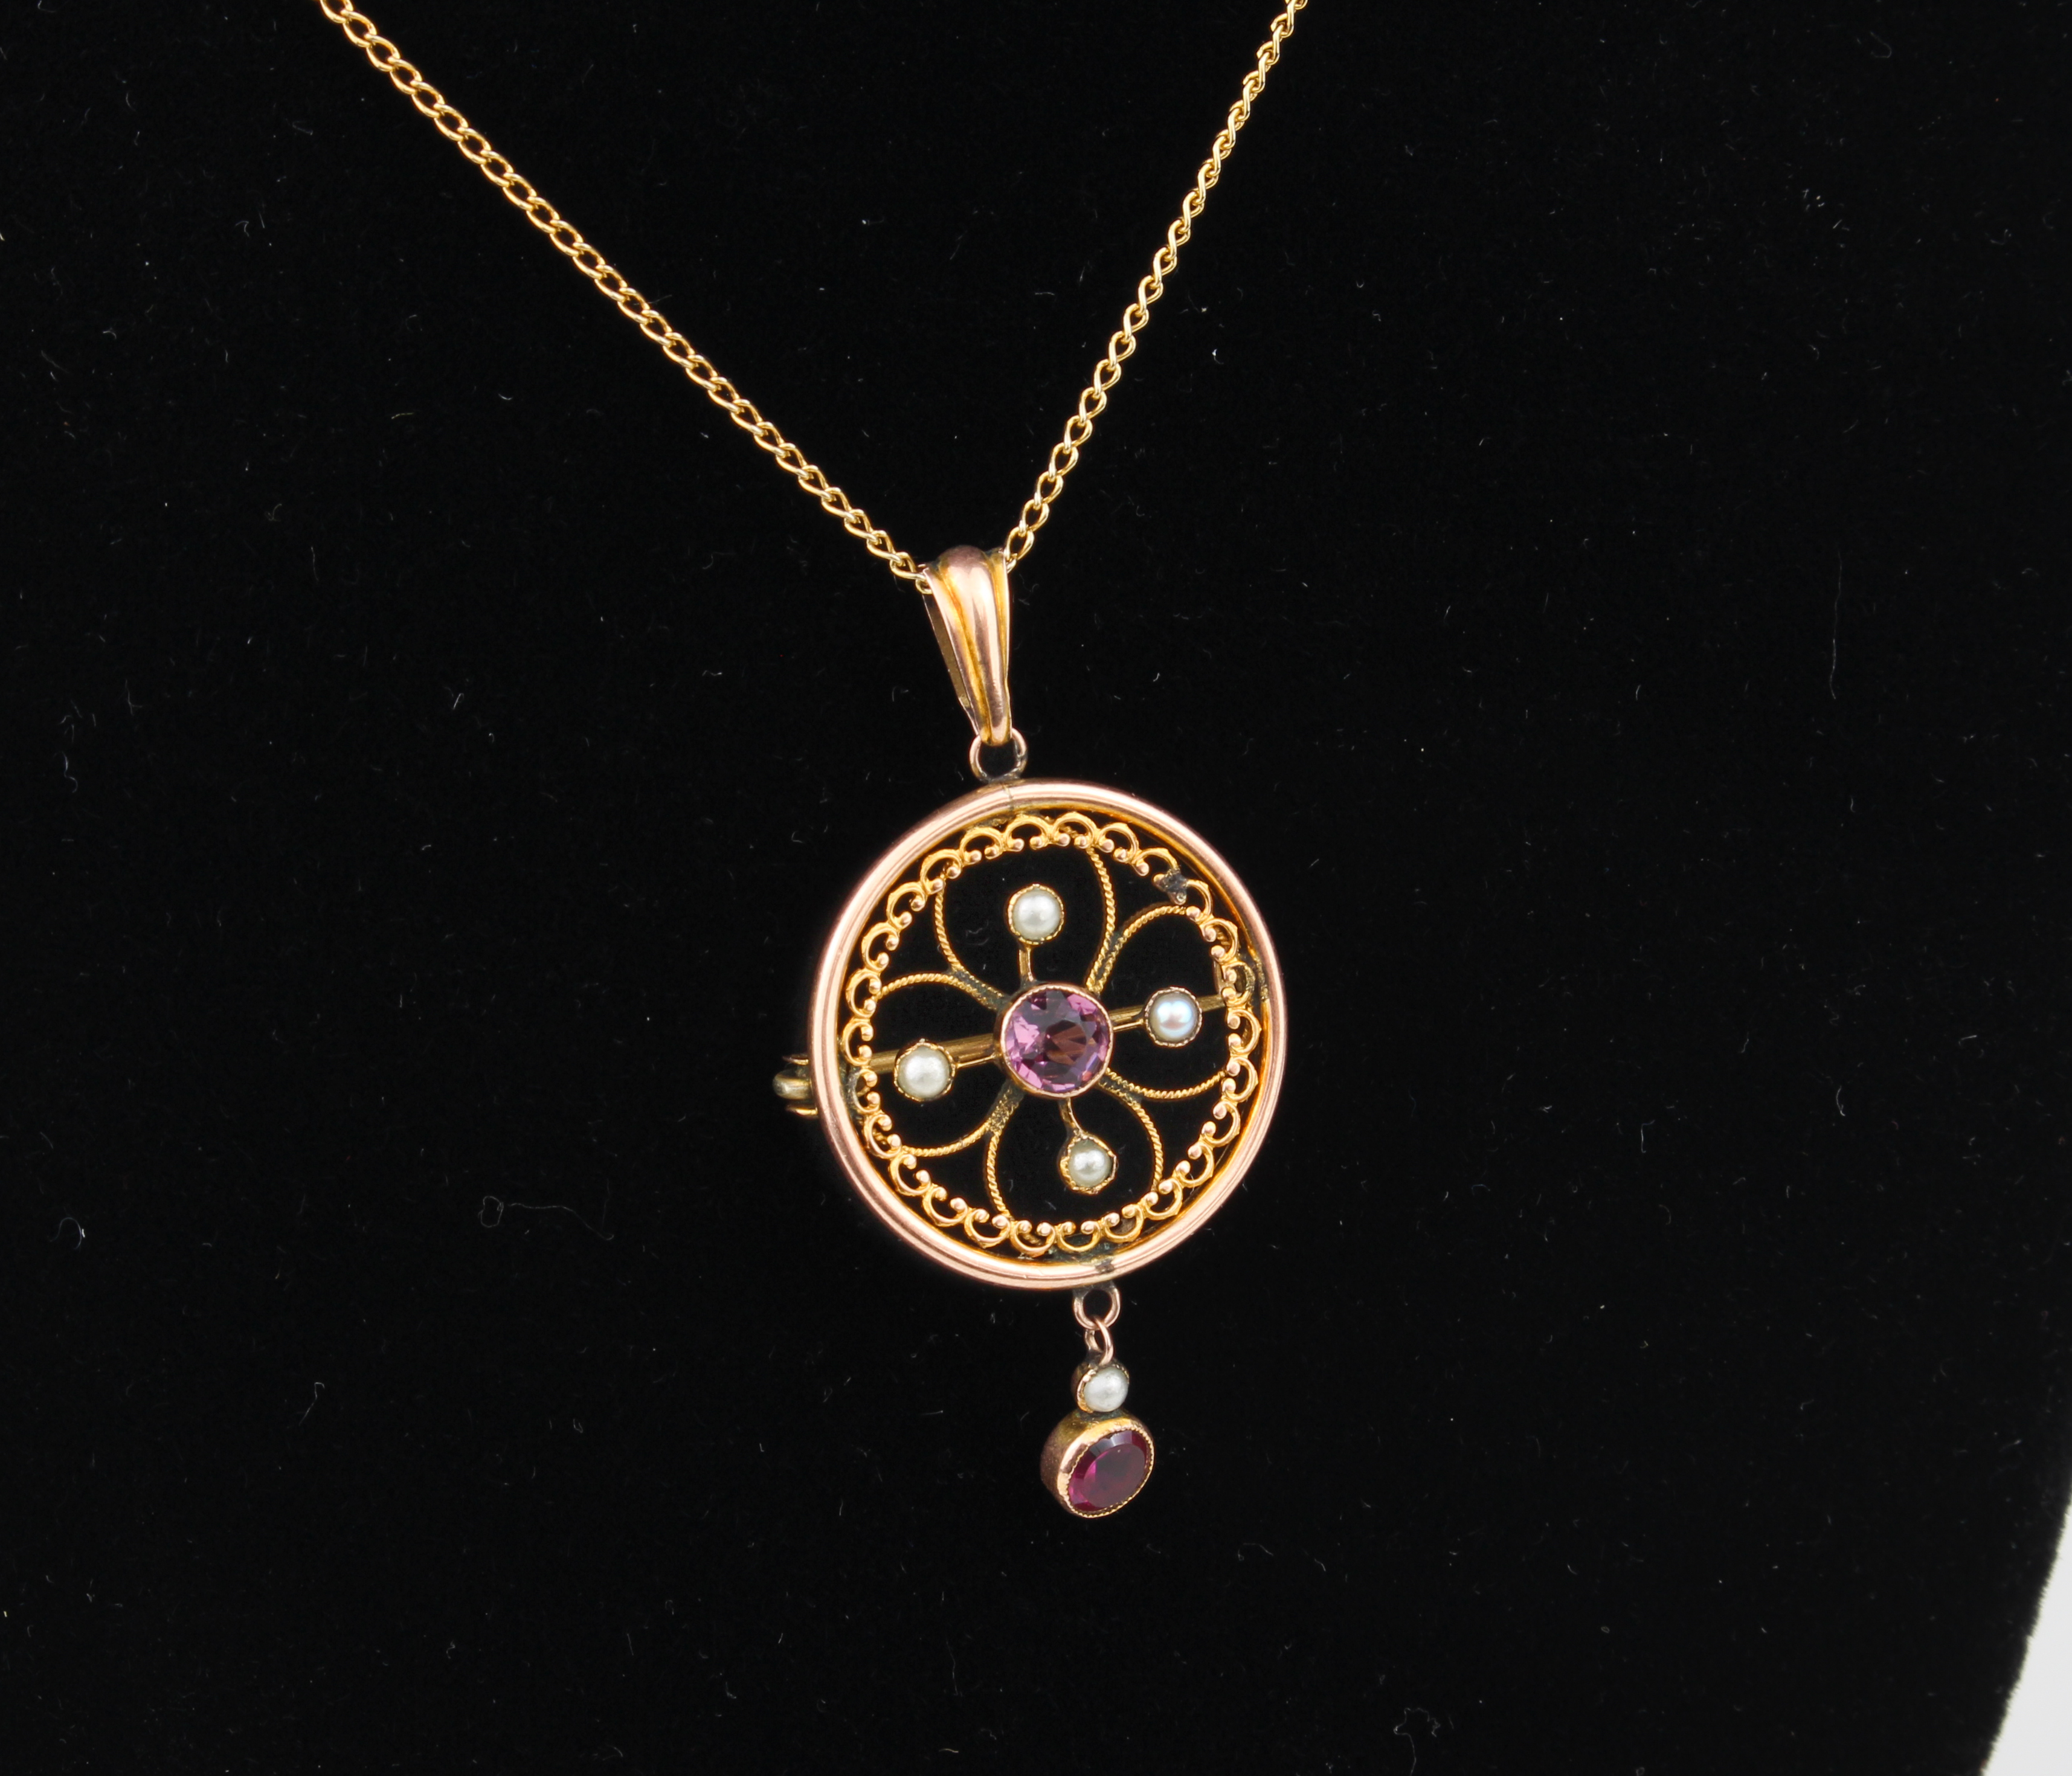 An early 20th century 9ct rose gold, amethyst and seed pearl pendant brooch - target shaped with a